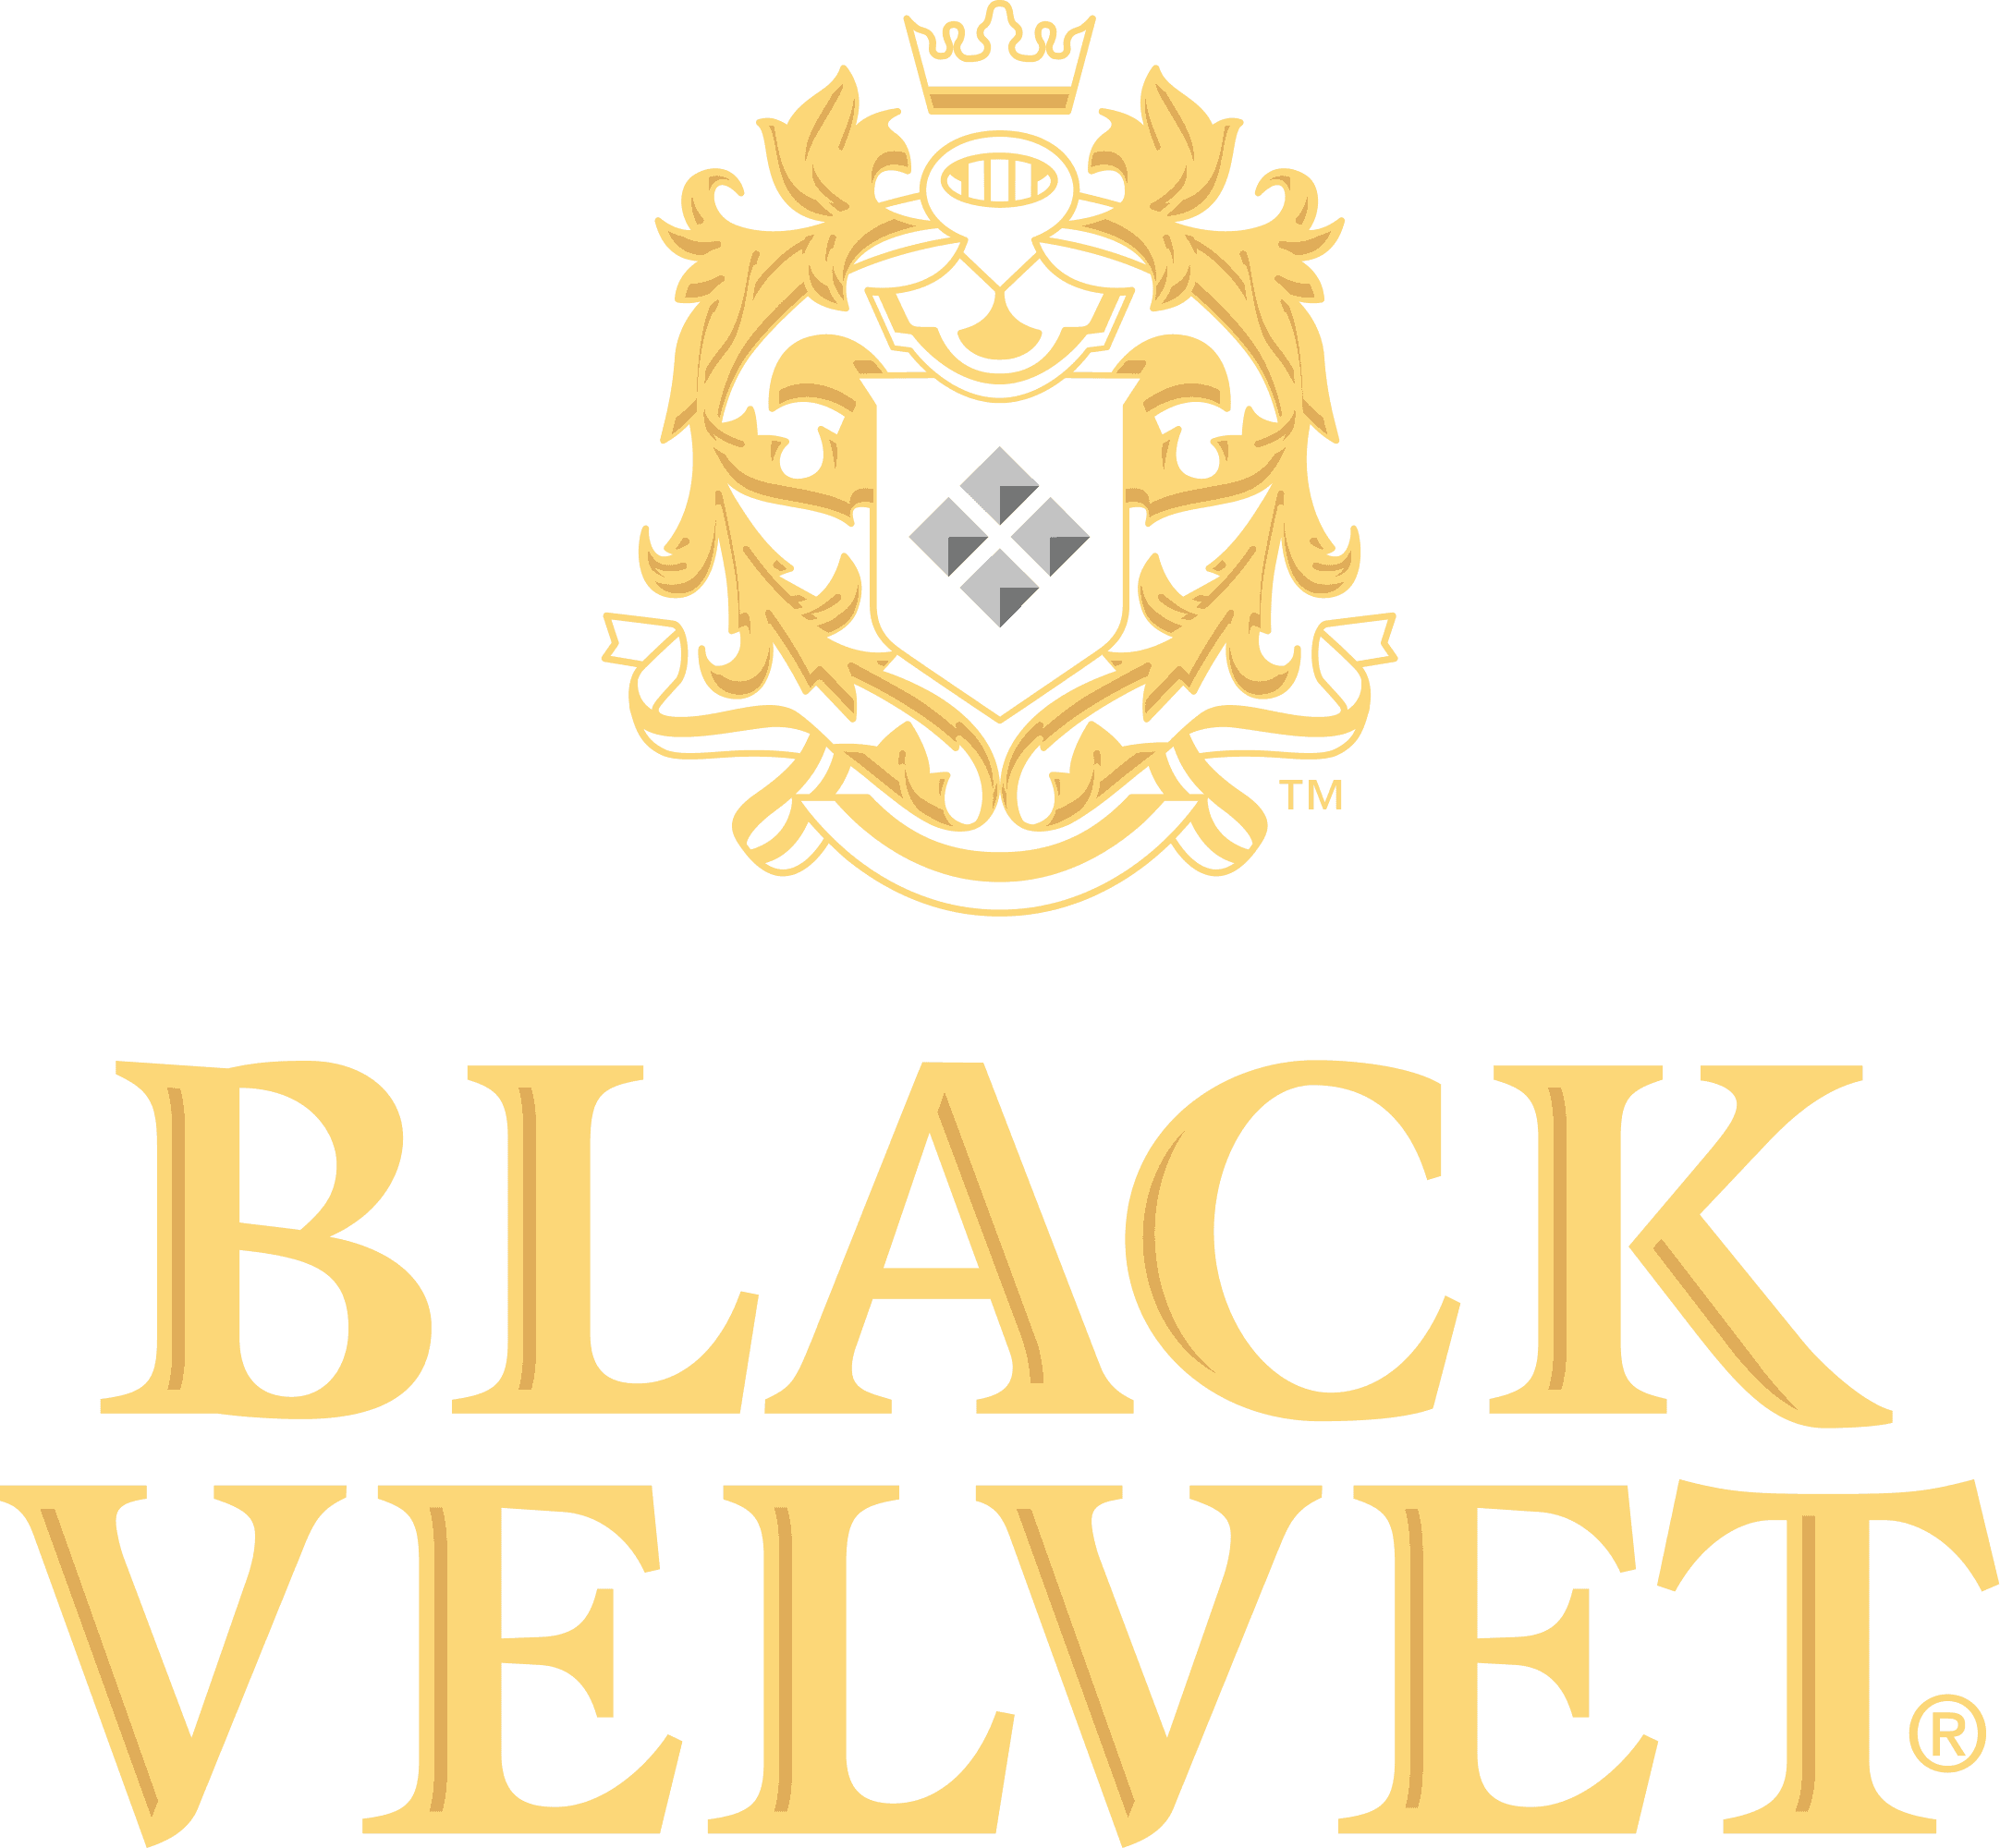 High Res PNG Black Velvet Color Stacked Logo with Crest - Heaven Hill Brands Signs Agreement to Acquire Black Velvet Canadian Whisky